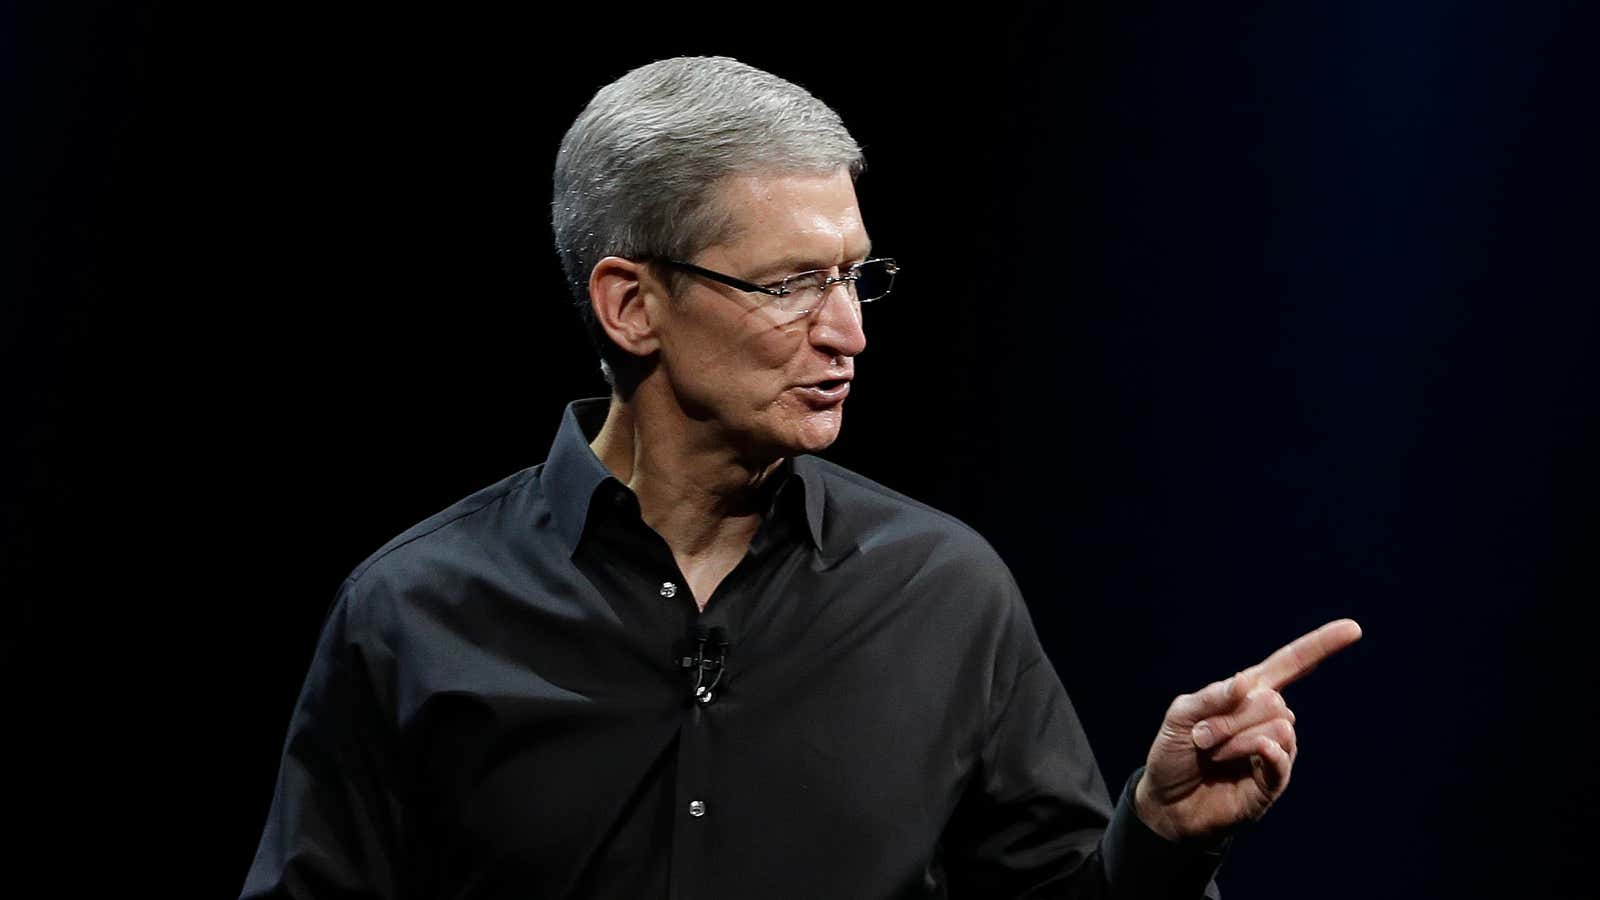 This is the year Apple CEO Tim Cook tips his hand.